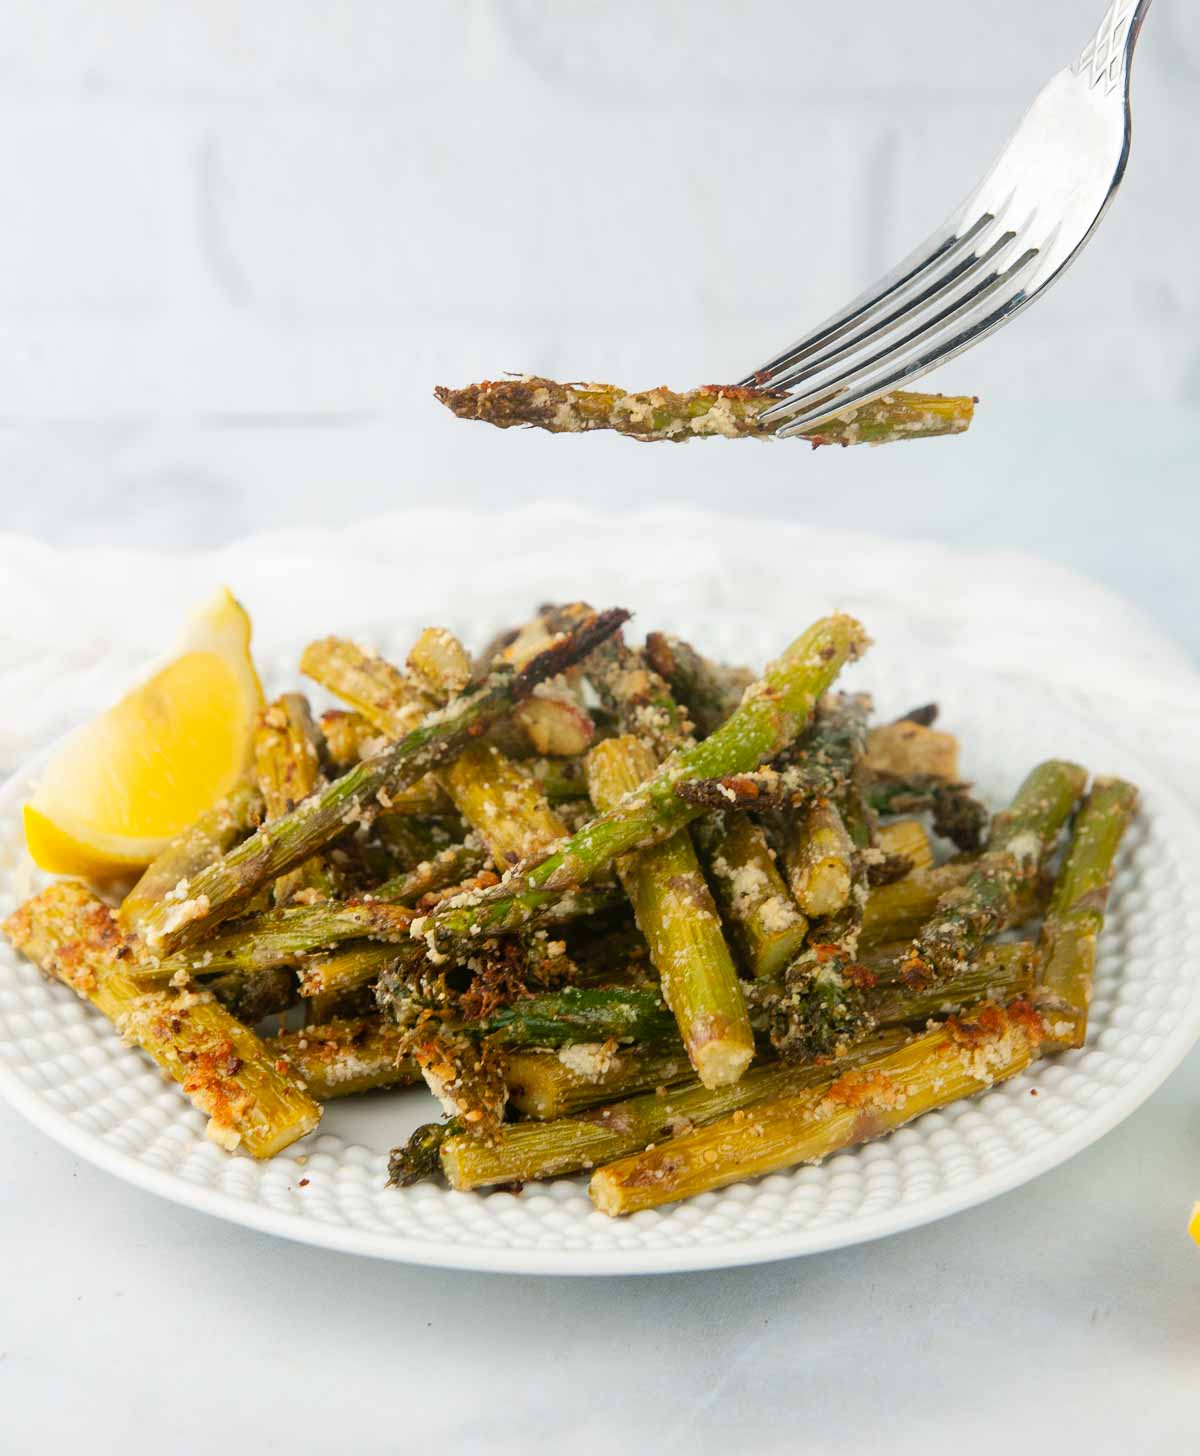 A forkful of air fryer asparagus with parmesan cheese in a white kitchen. It makes the perfect side or light, crispy appetizer.